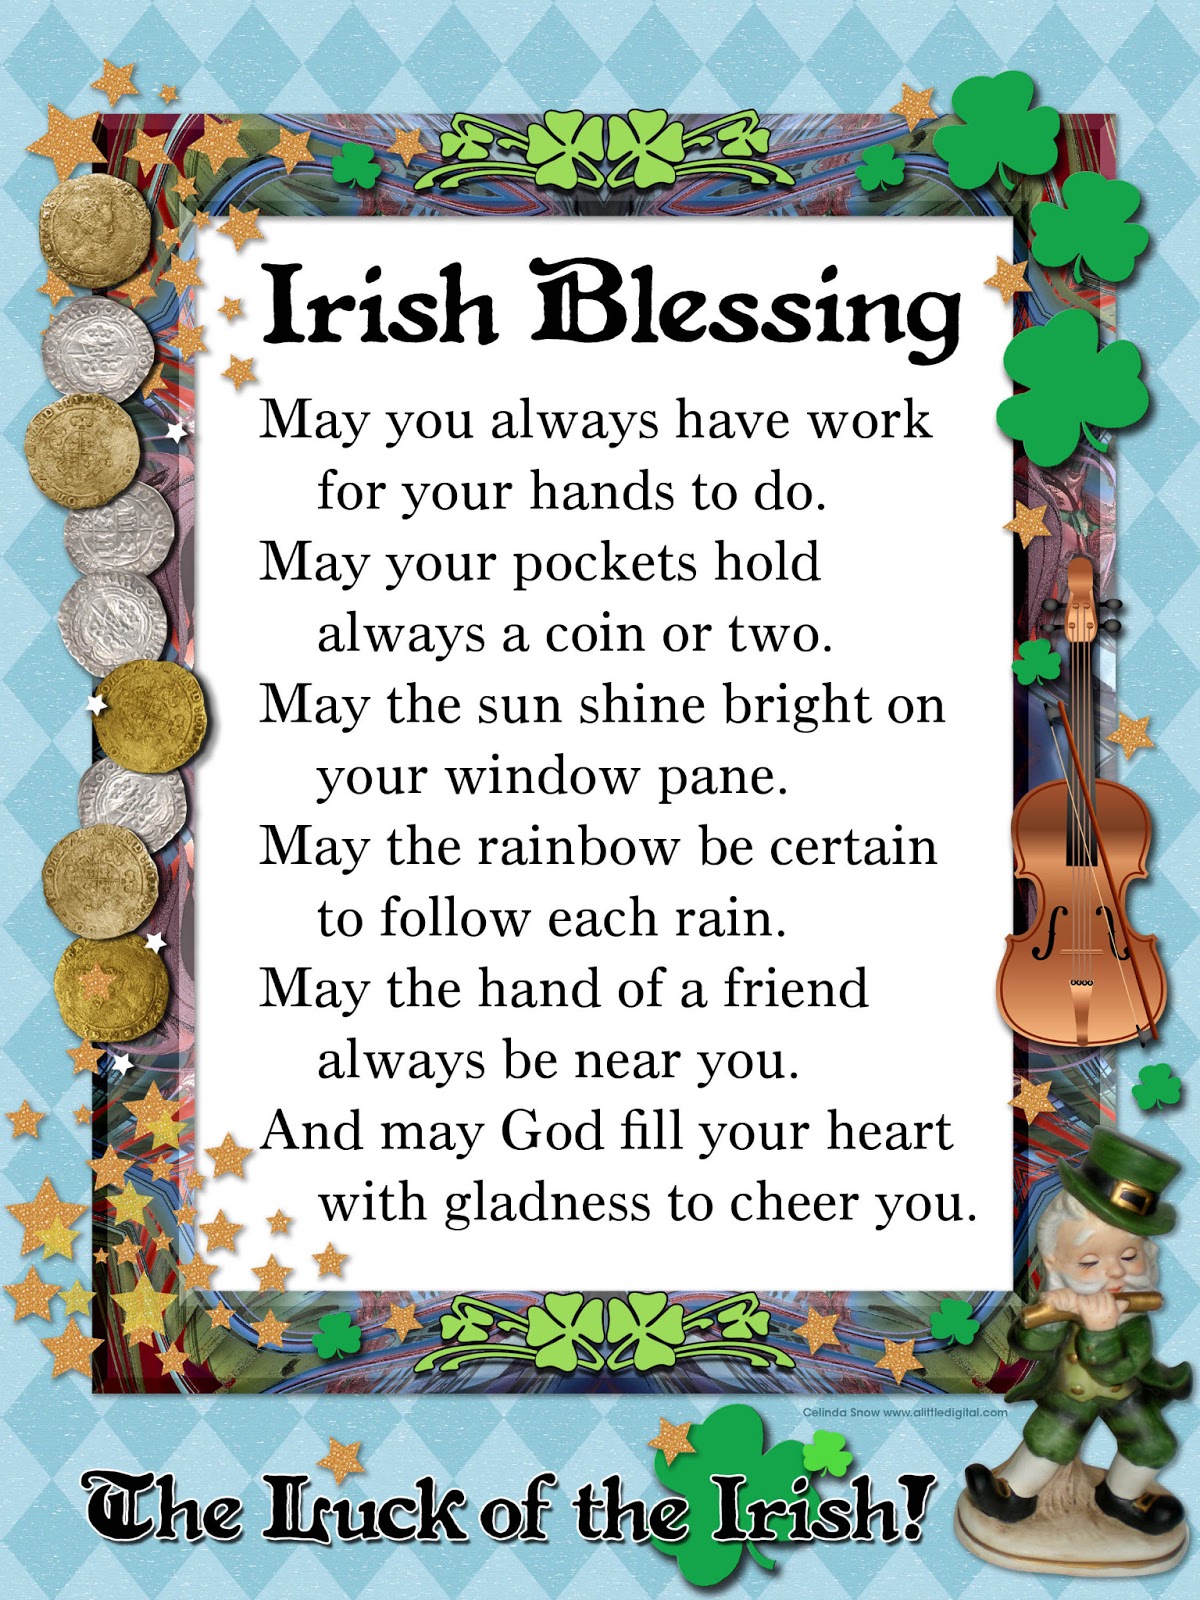 nubia-group-inspiration-sharing-irish-blessings-from-the-net